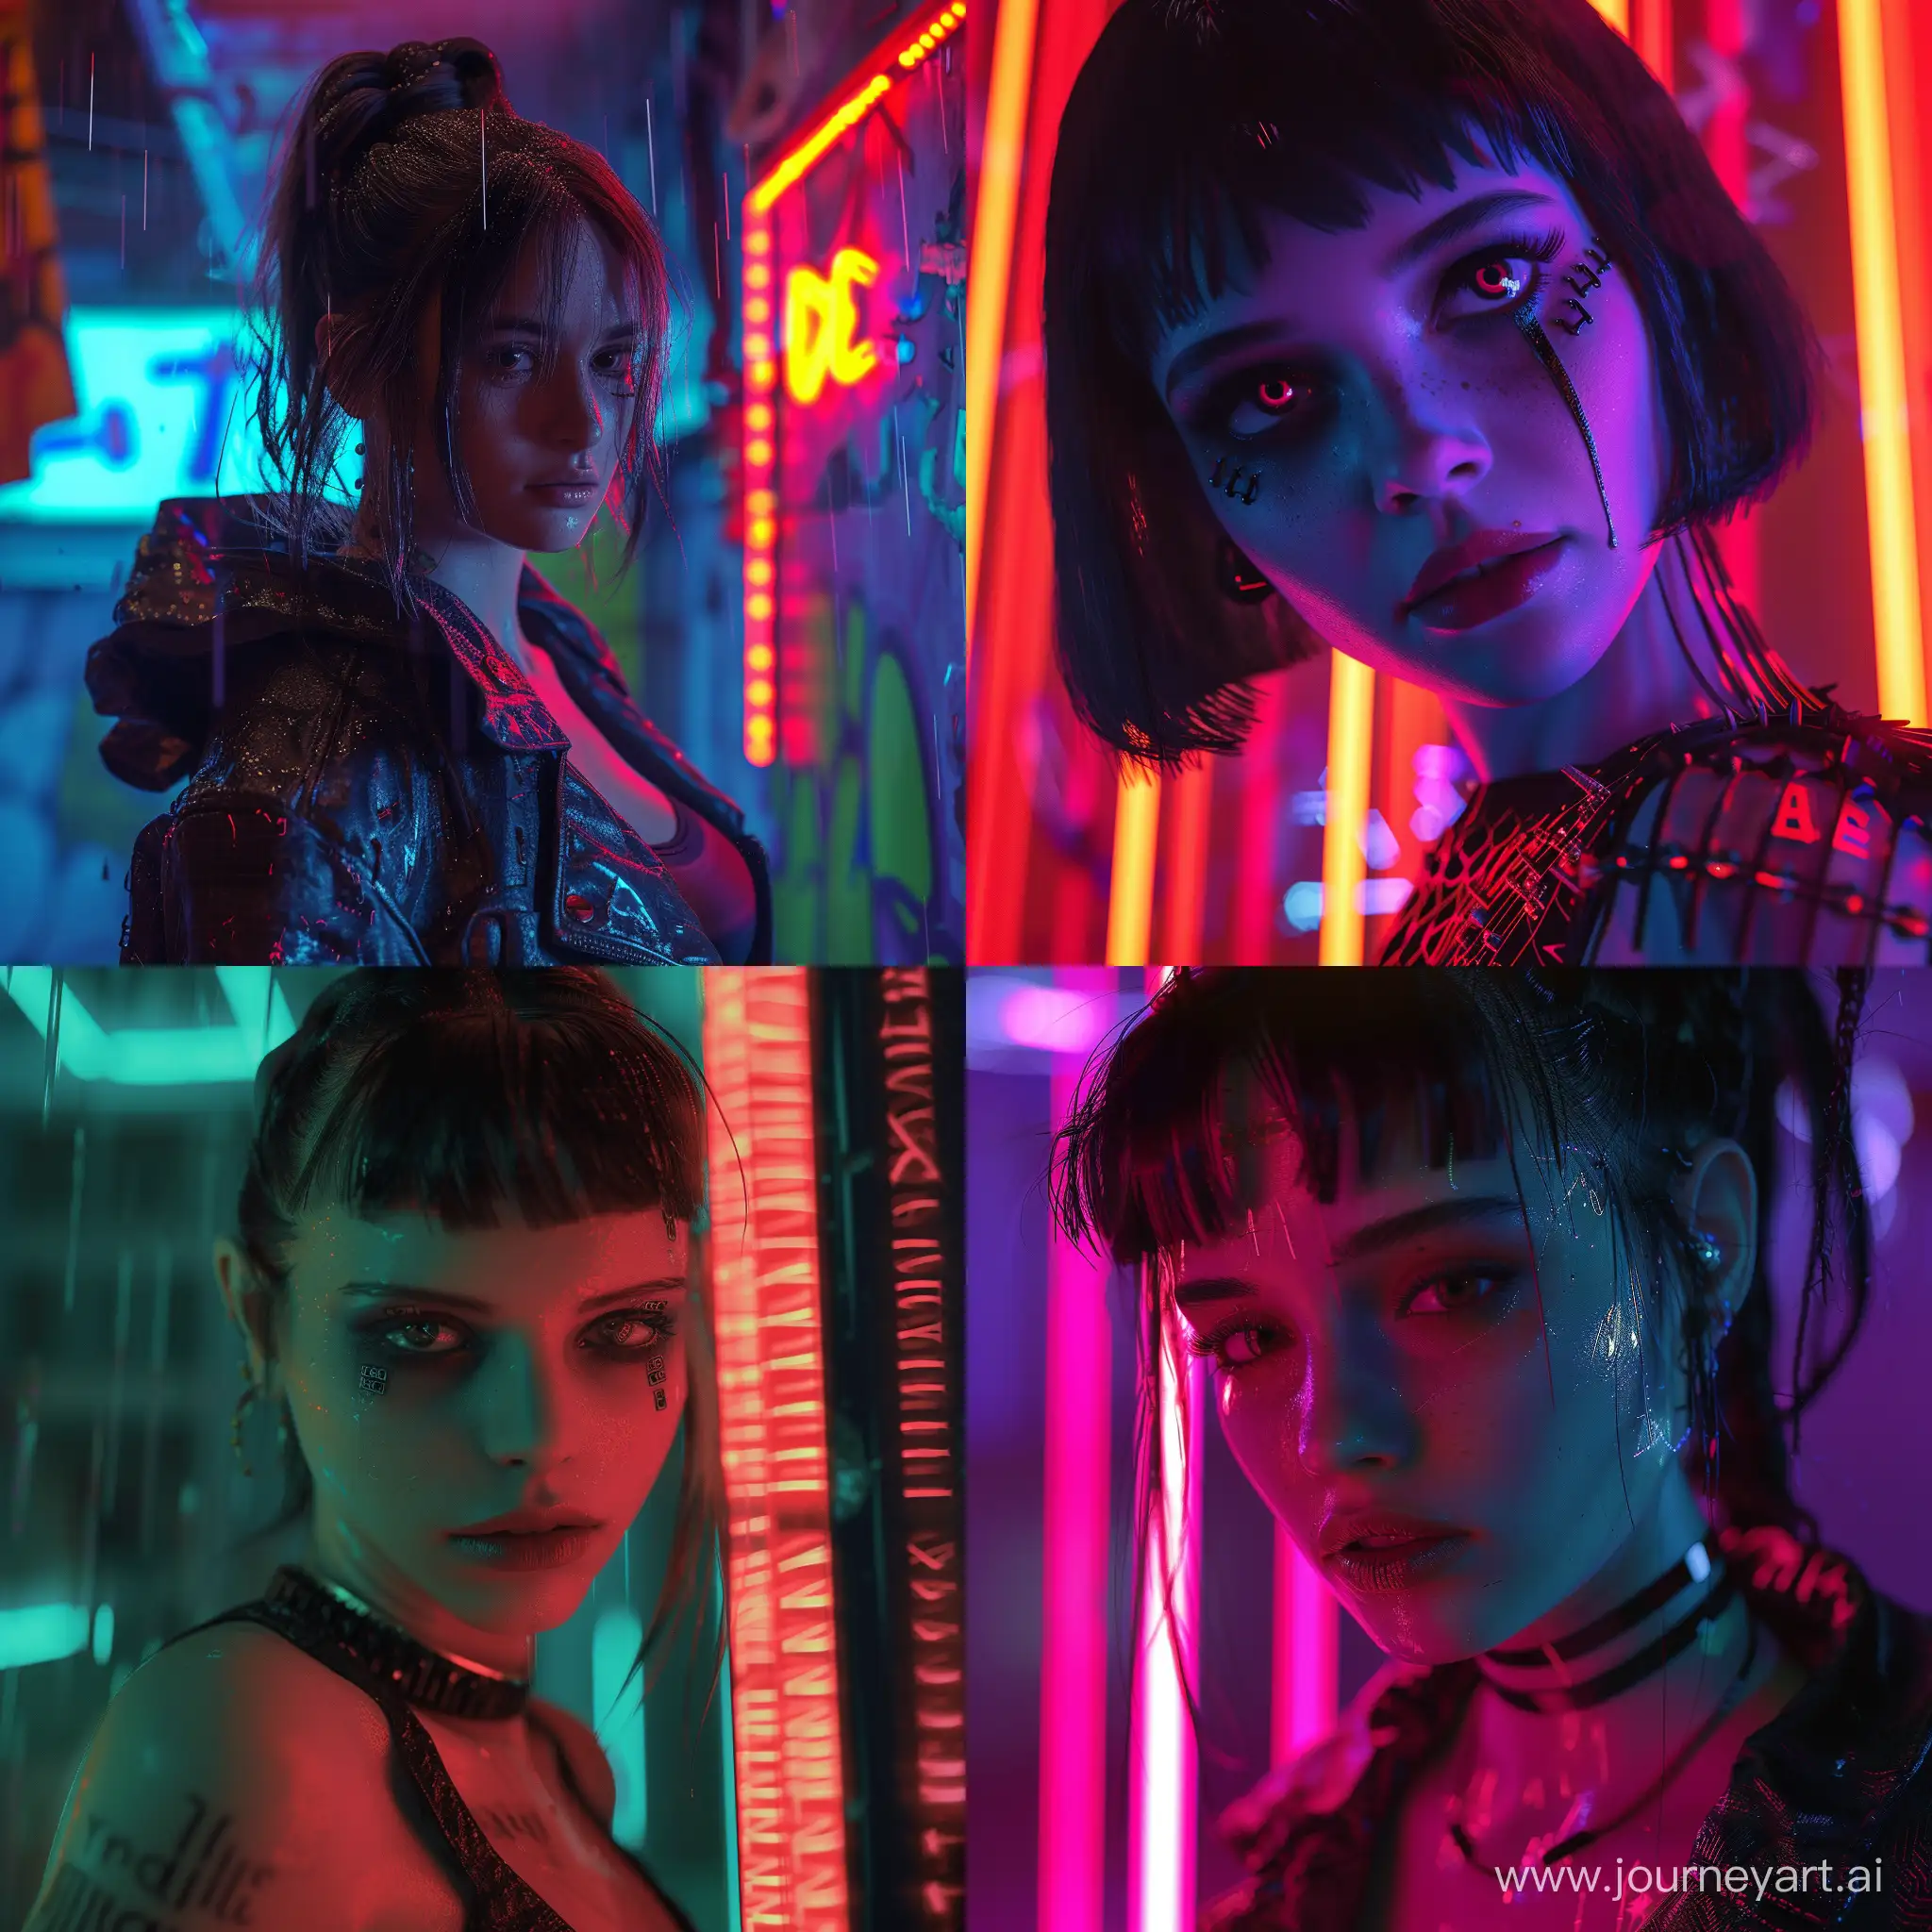 Matilda-from-Leon-Movie-in-Cyberpunk-Style-with-Neon-Lights